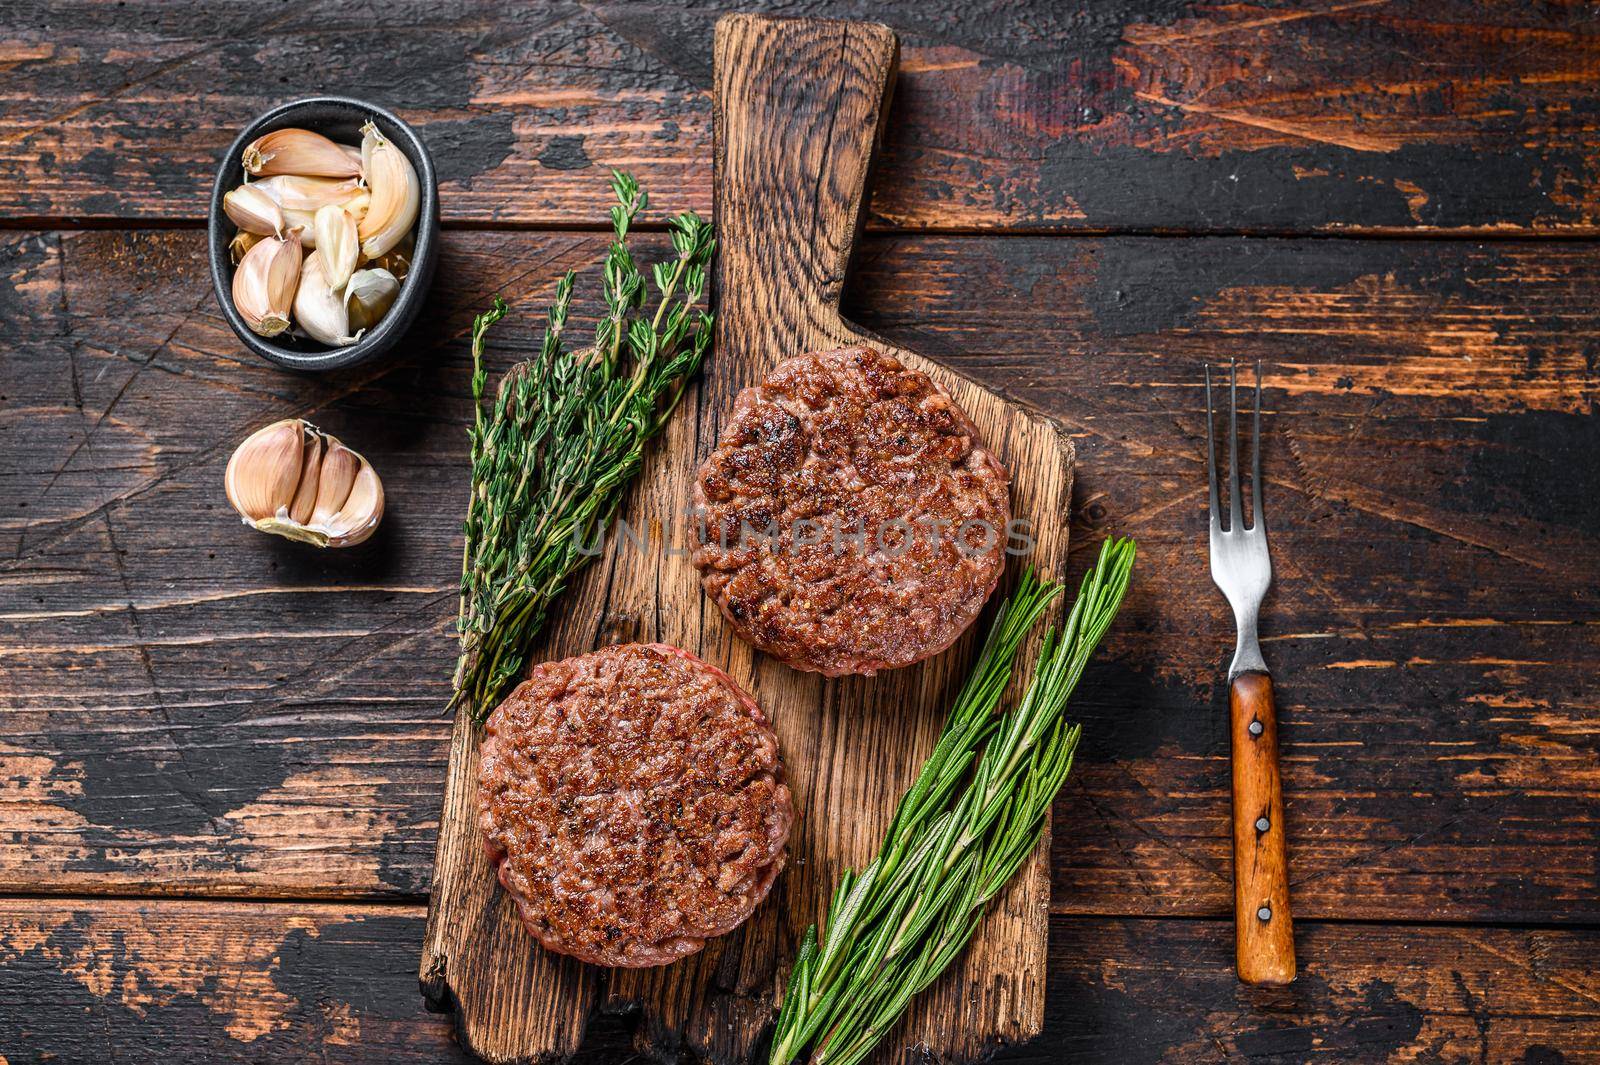 Barbecue steak patties for burger from ground beef meat on a wooden cutting board. Dark wooden background. Top view by Composter